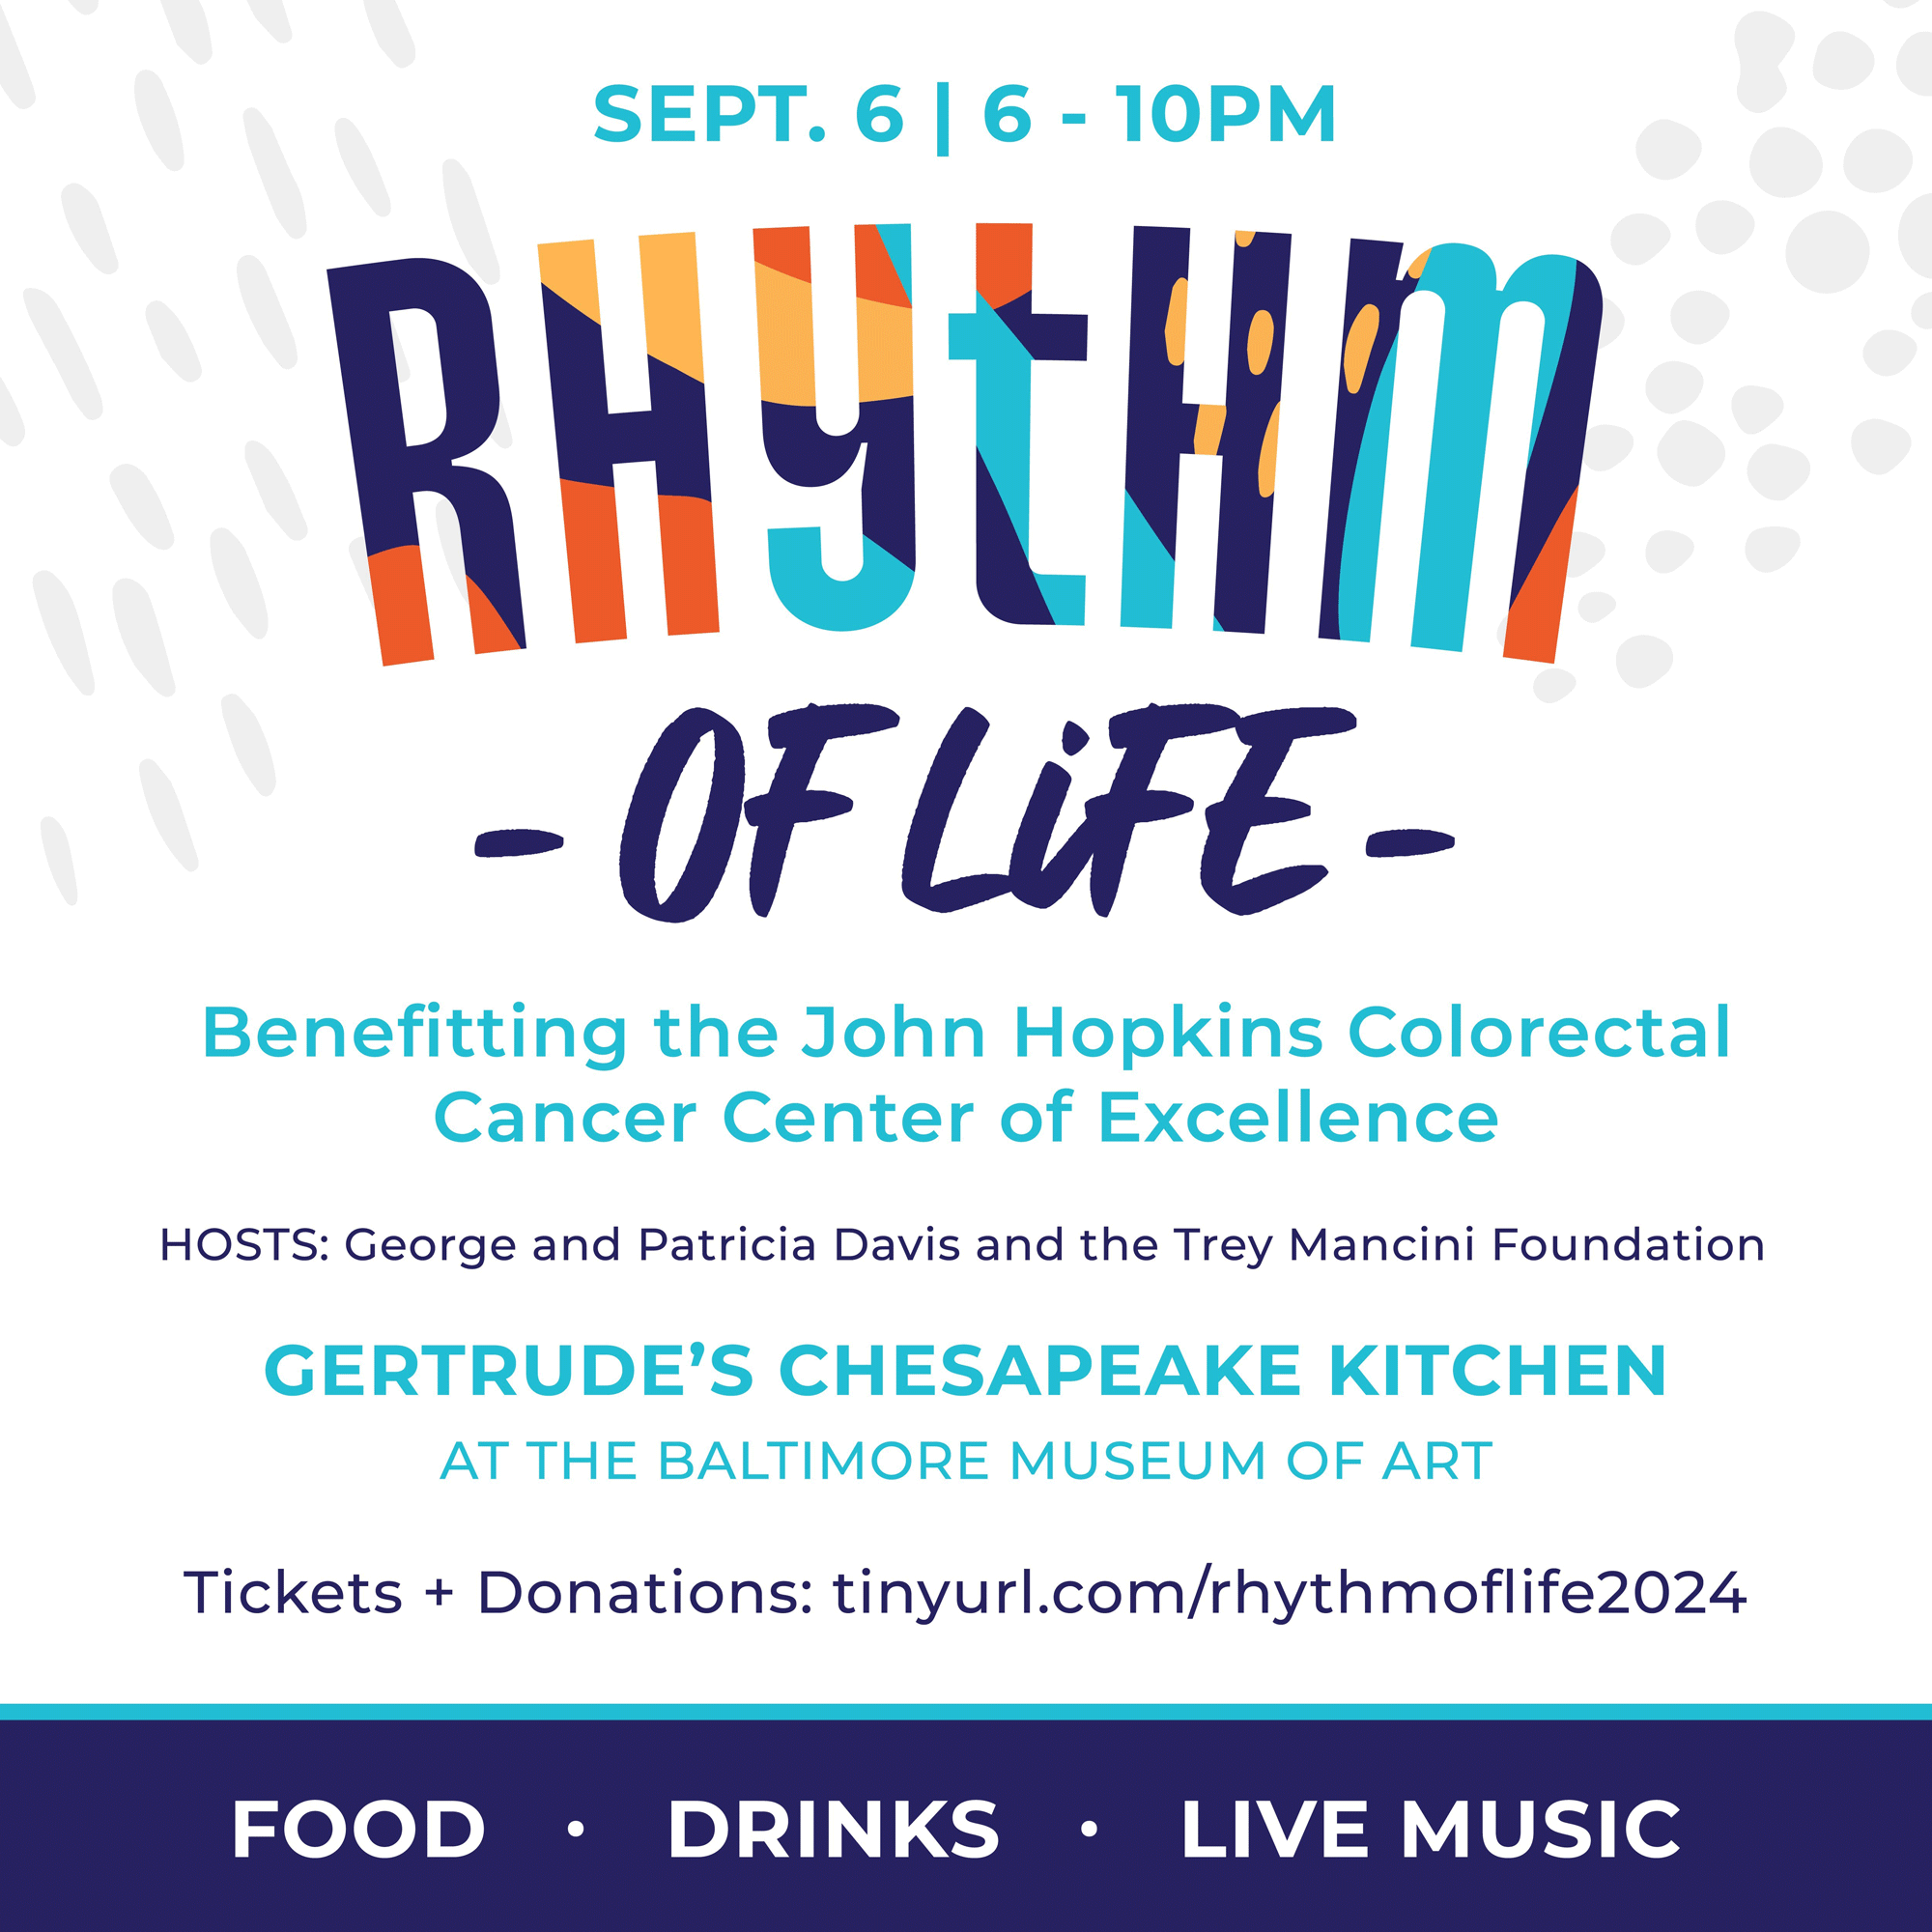 Rhythm of Life: September 6 from 6-10pm